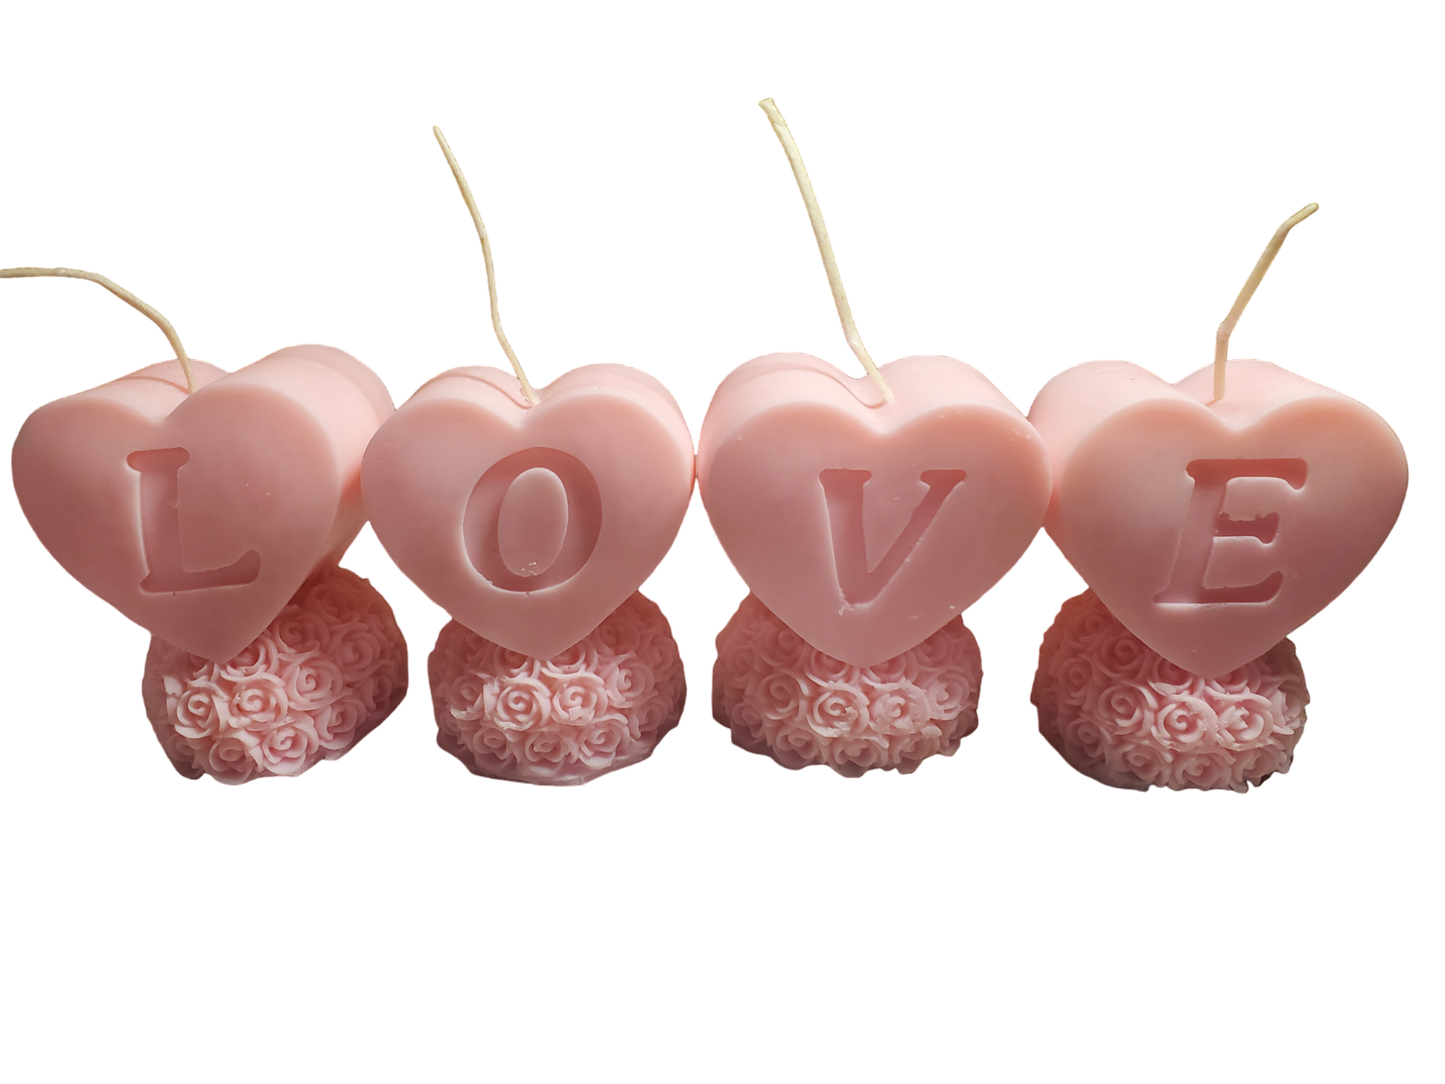 "Love" Candles